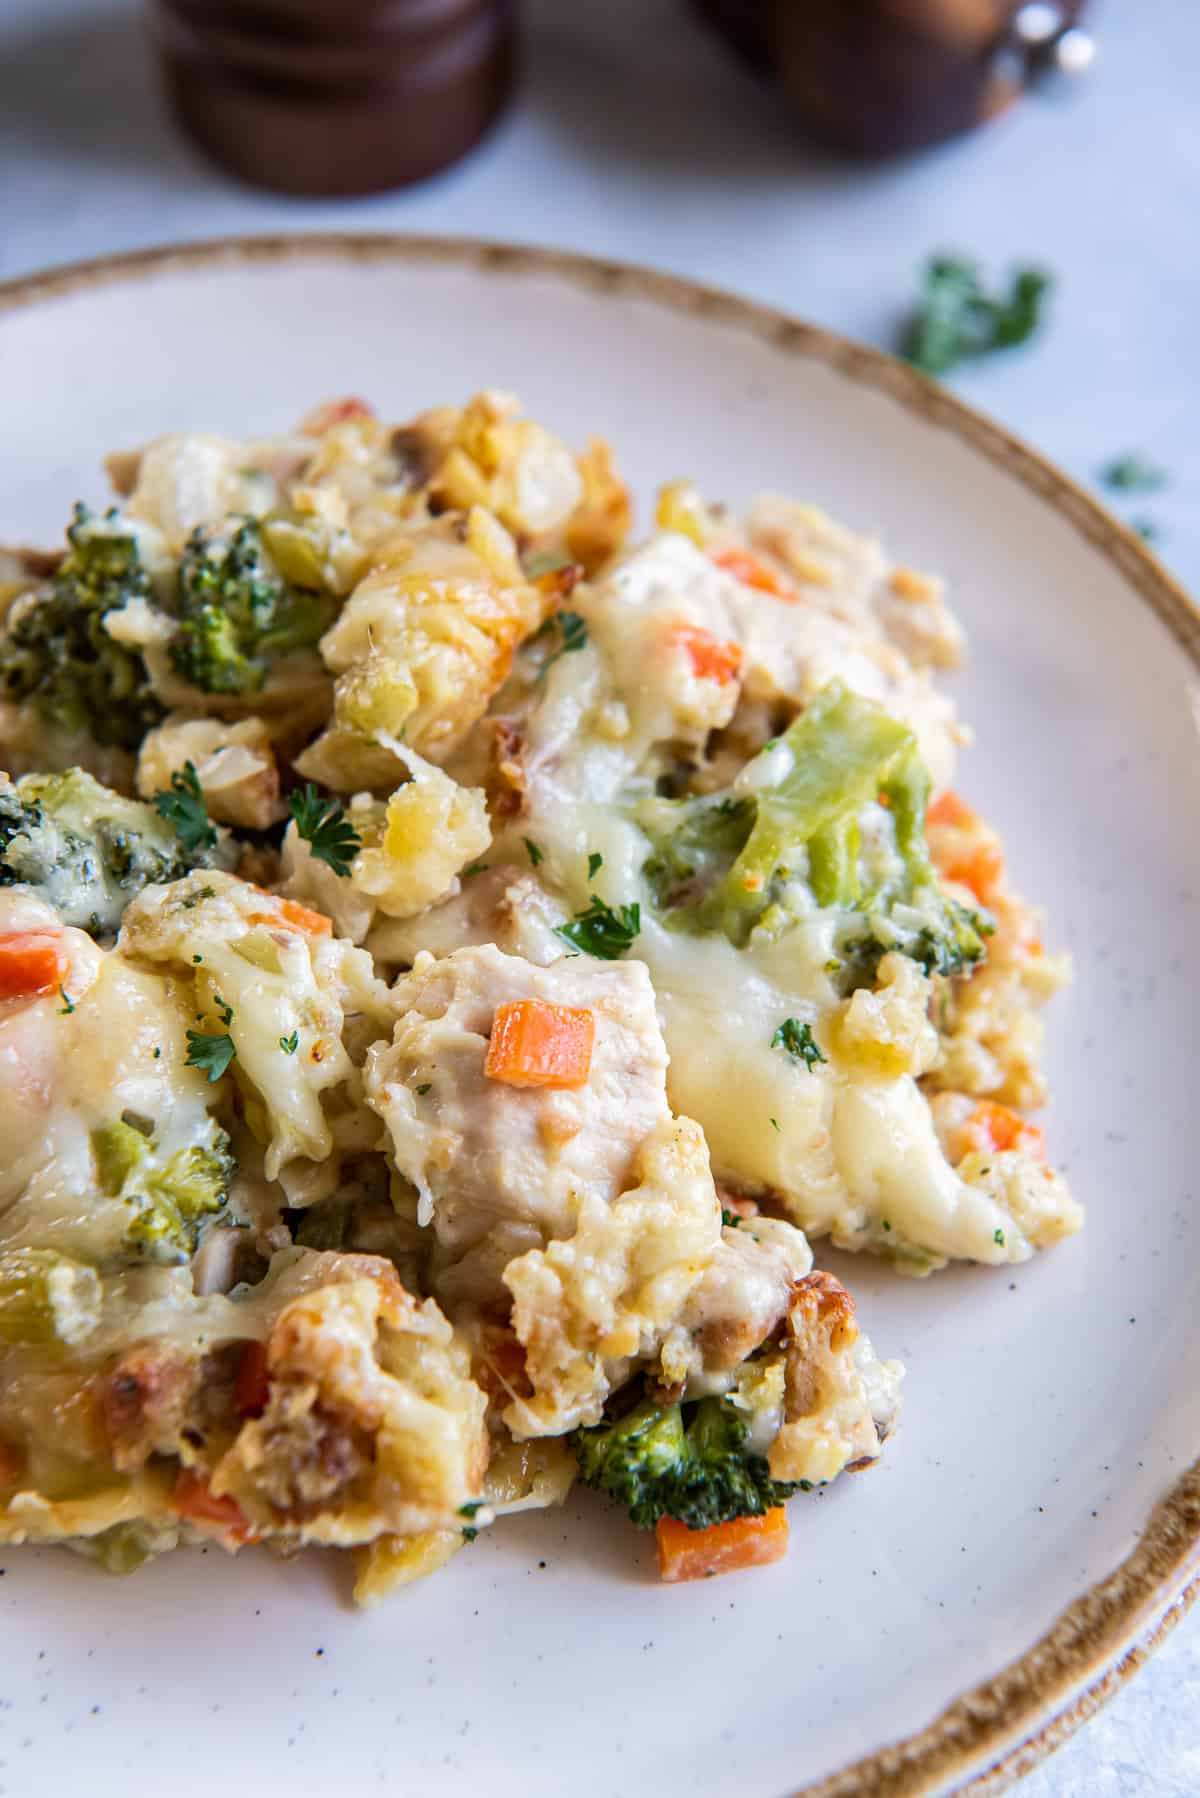 A serving of chicken stuffing bake with broccoli and cheese on a white plate with a brown trim.